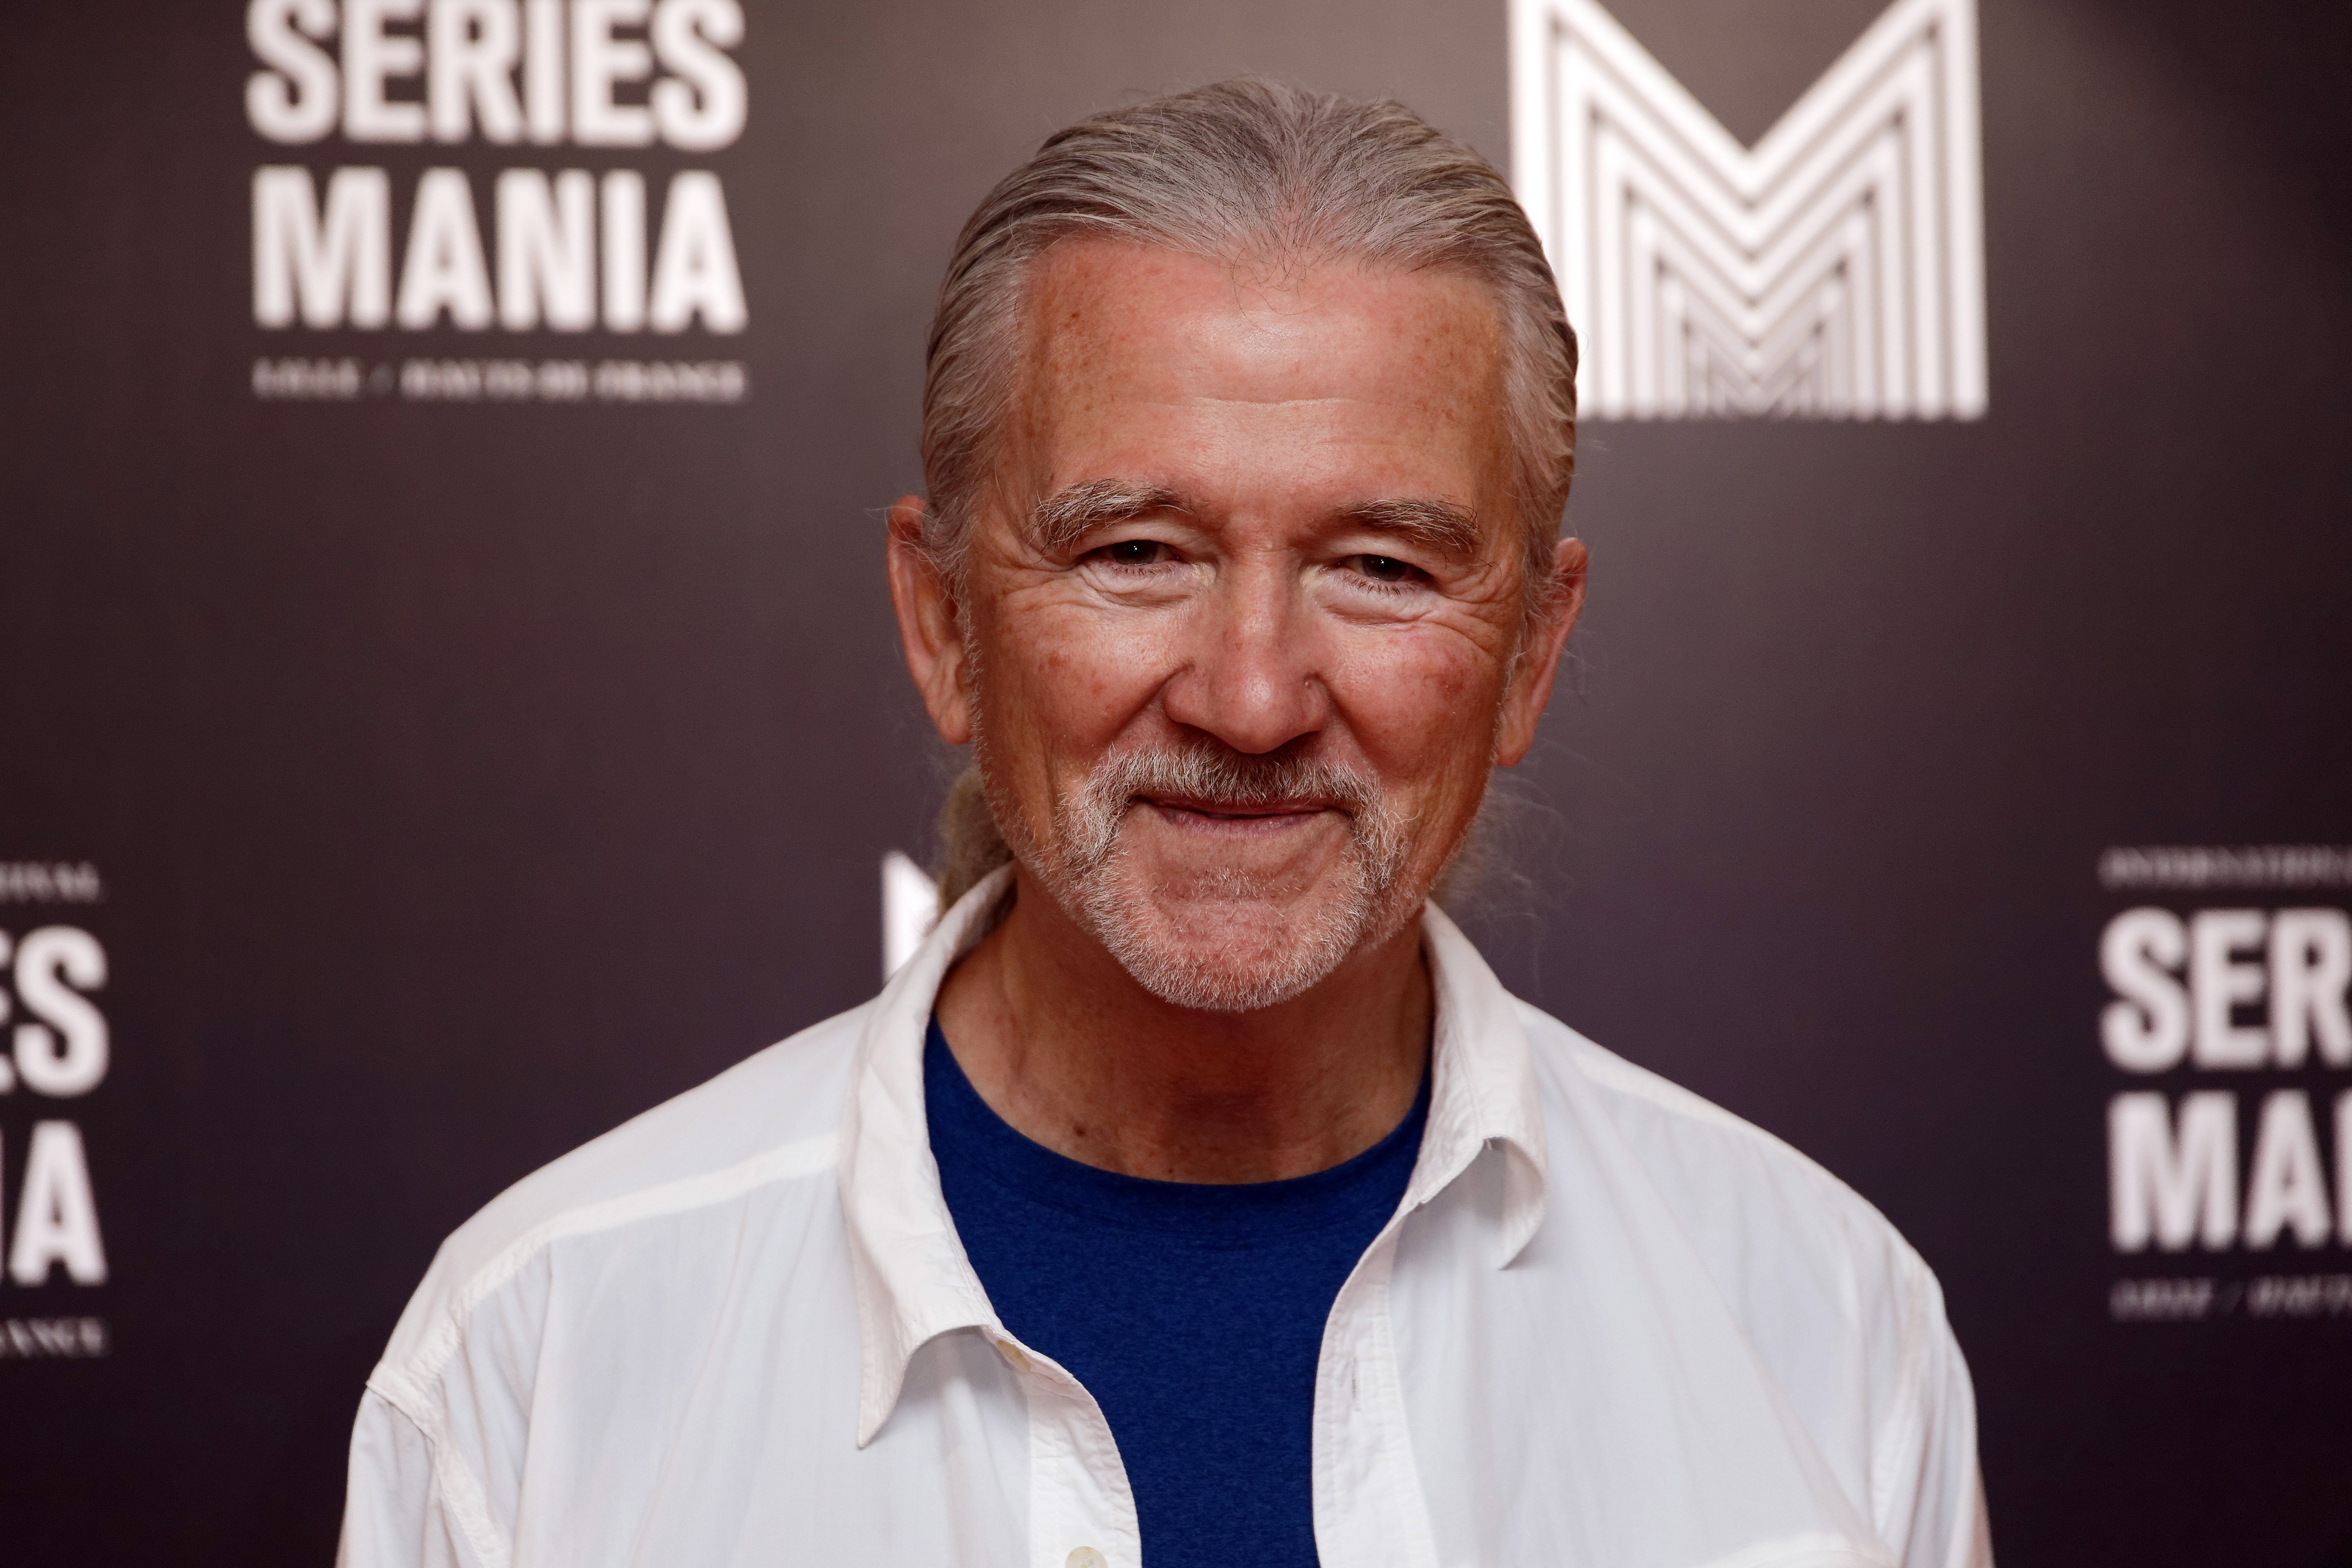 Veteran actor Patrick Duffy attends the Series Mania in Lille, France on  May 2, 2018. | Photo: Getty Images